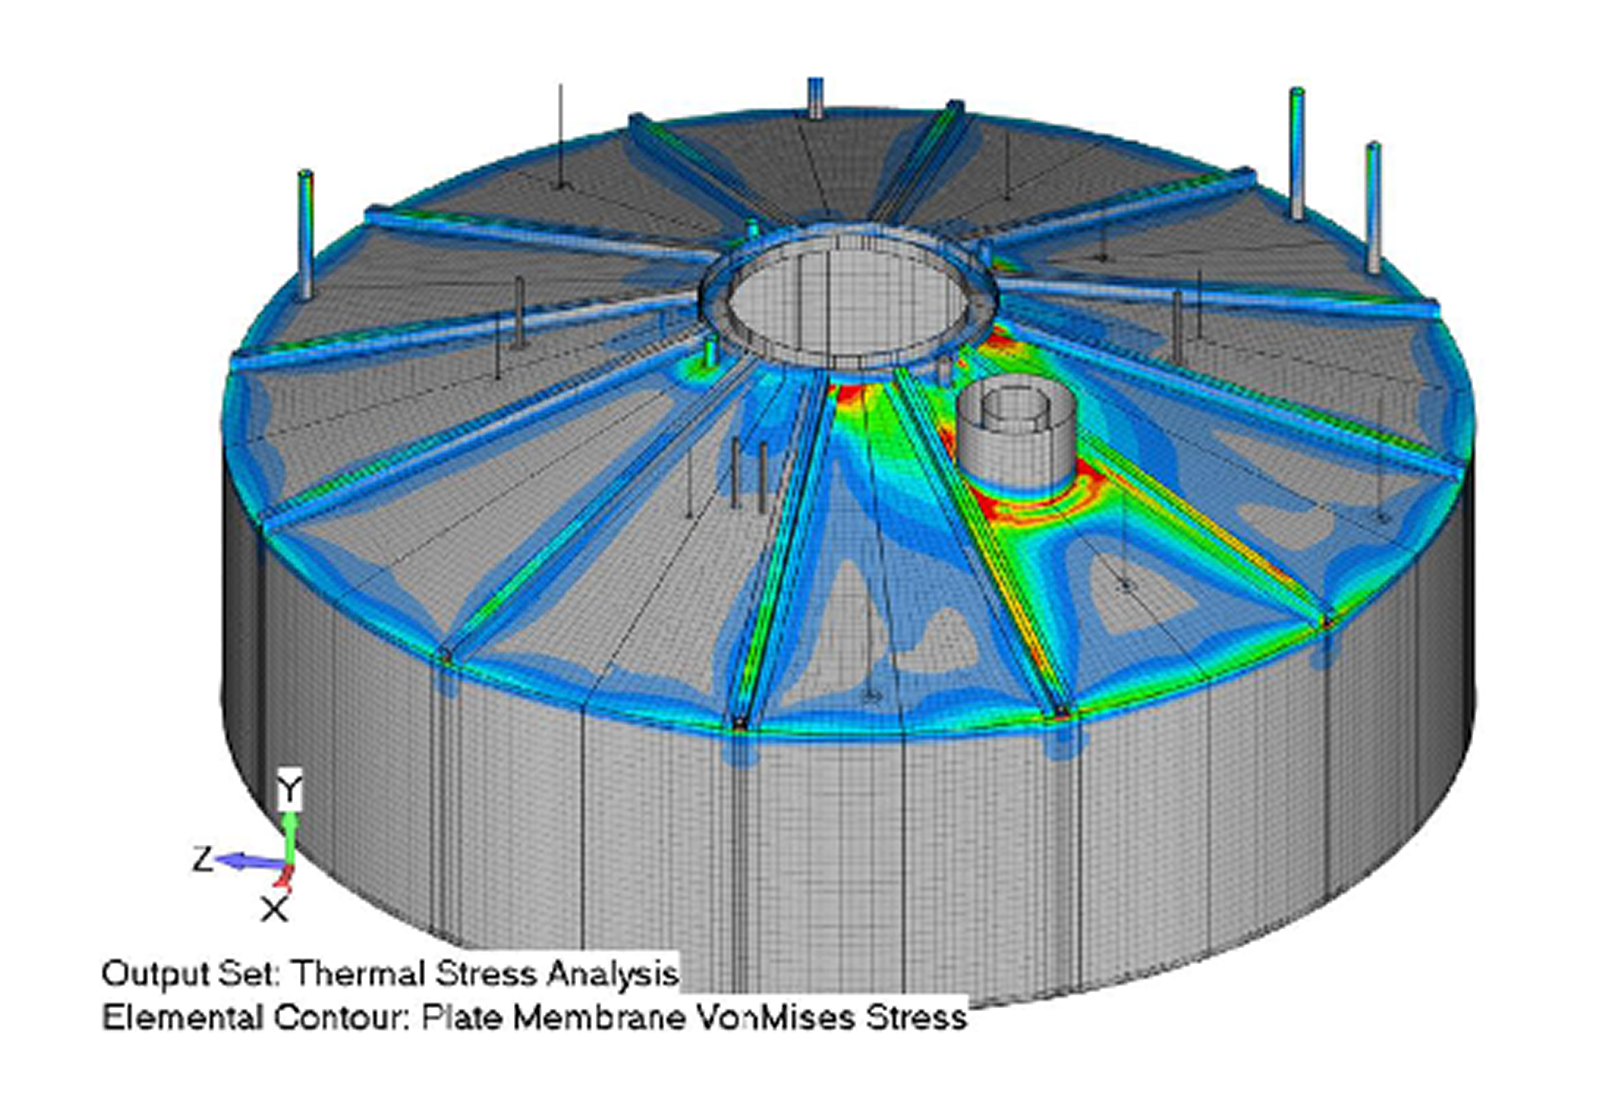 ASME Section VIII, Division 2 "Design-by-Analysis" Pressure Vessel Consulting Services